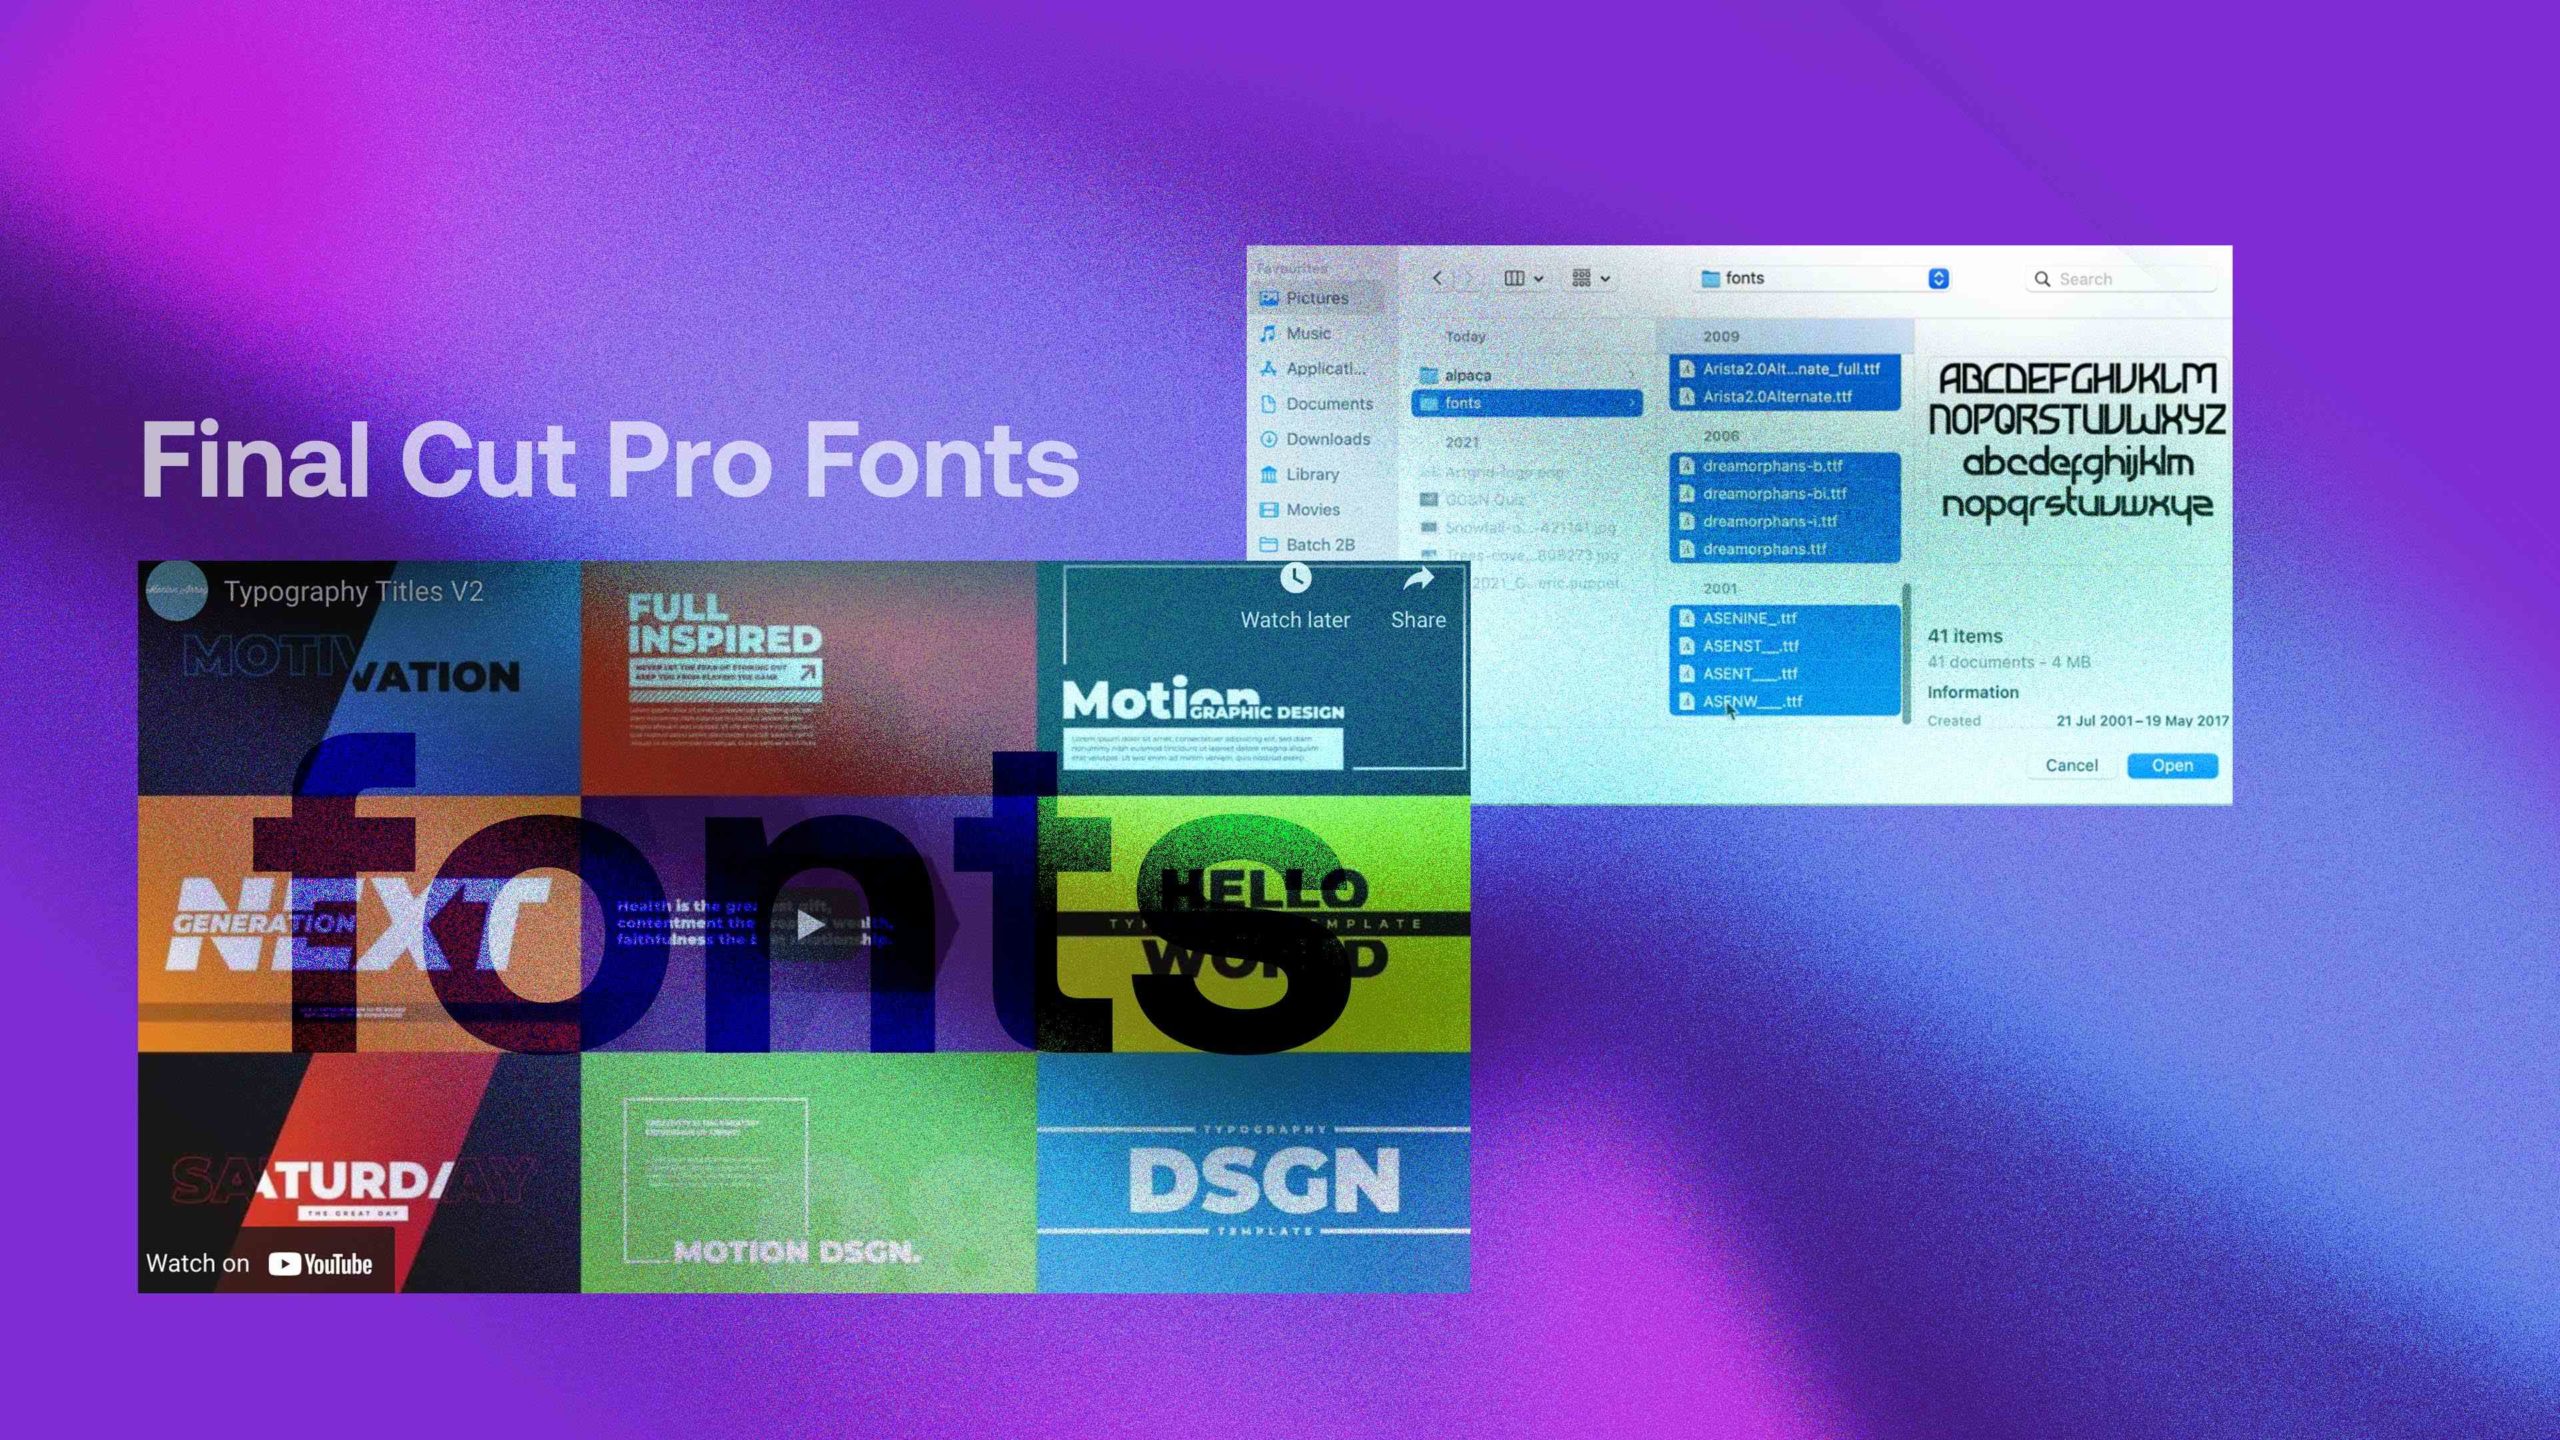 download fonts for final cut pro